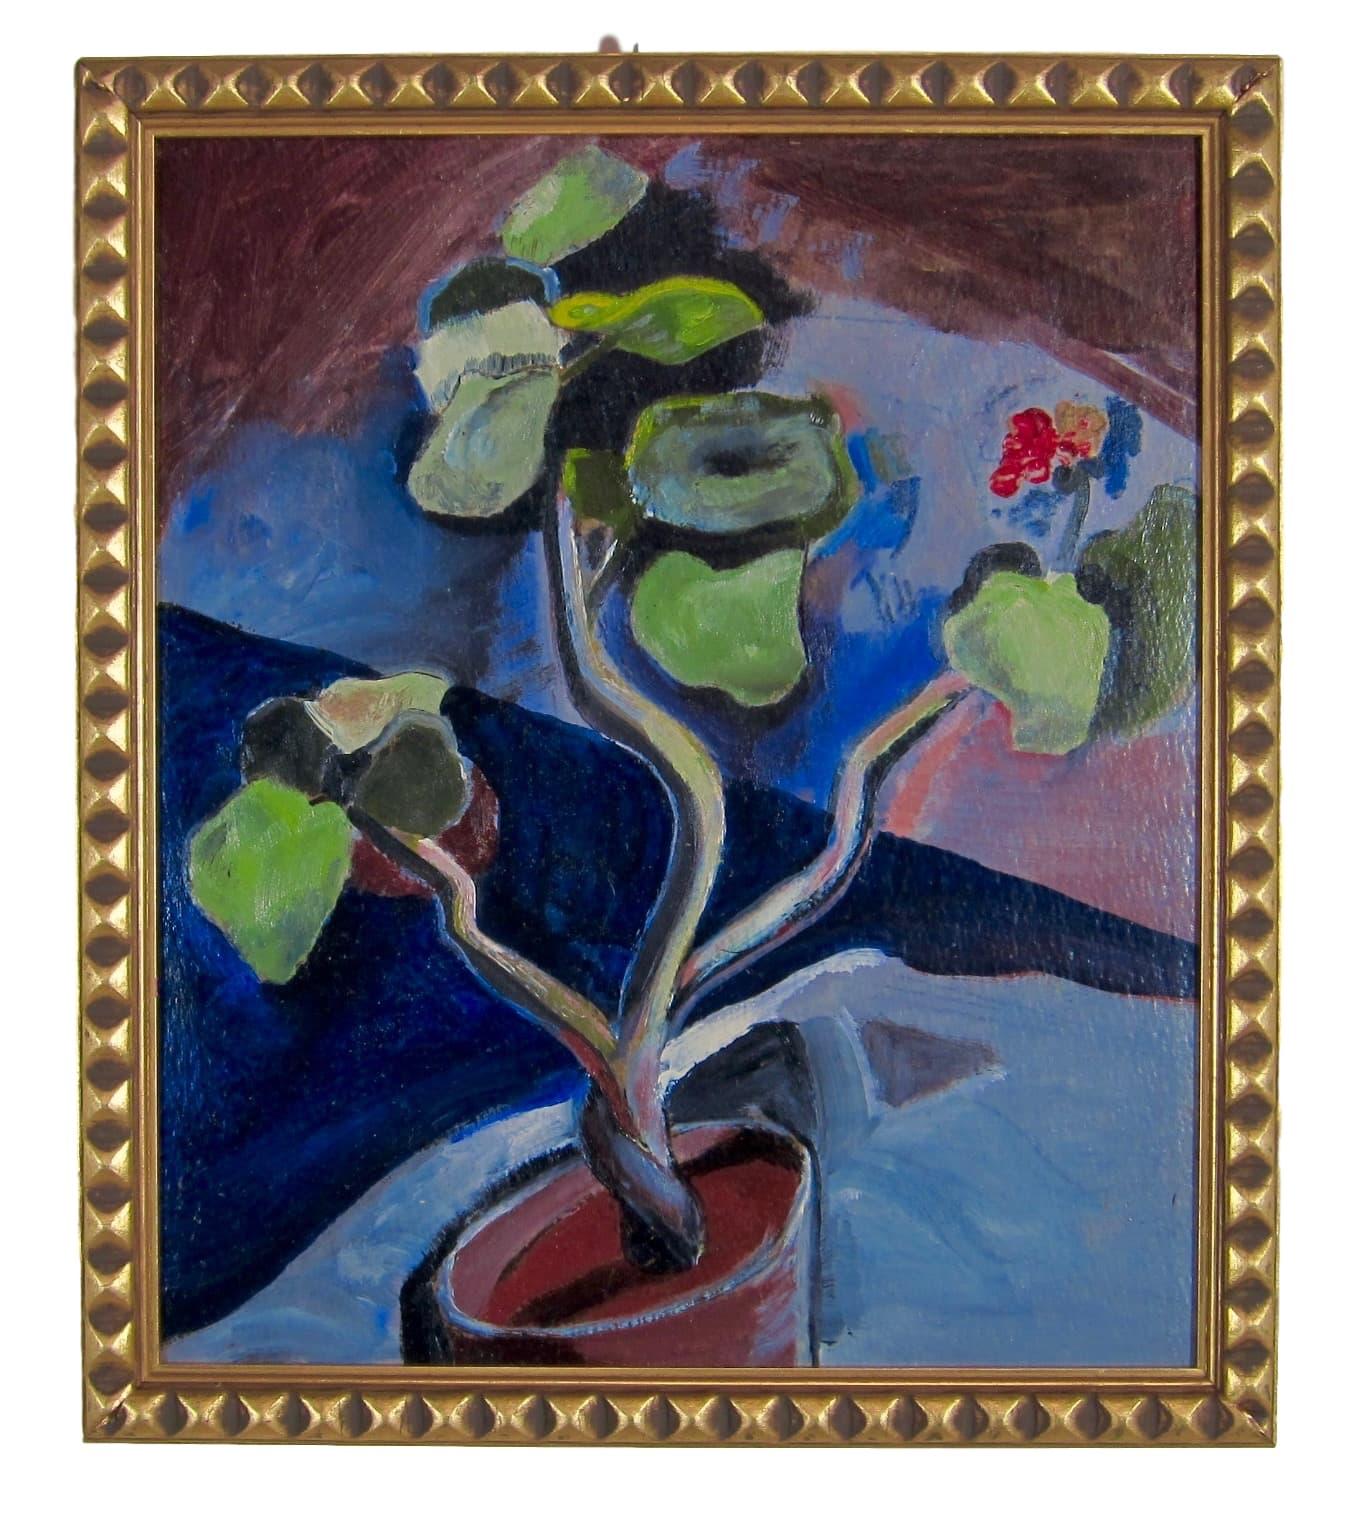 1930s Modernist still life oil painting of a potted flowering plant by American artist Richard Ayer.  This work comes from a large collection of the artist's works that came on to the market in San Francisco area several years ago.  This work is